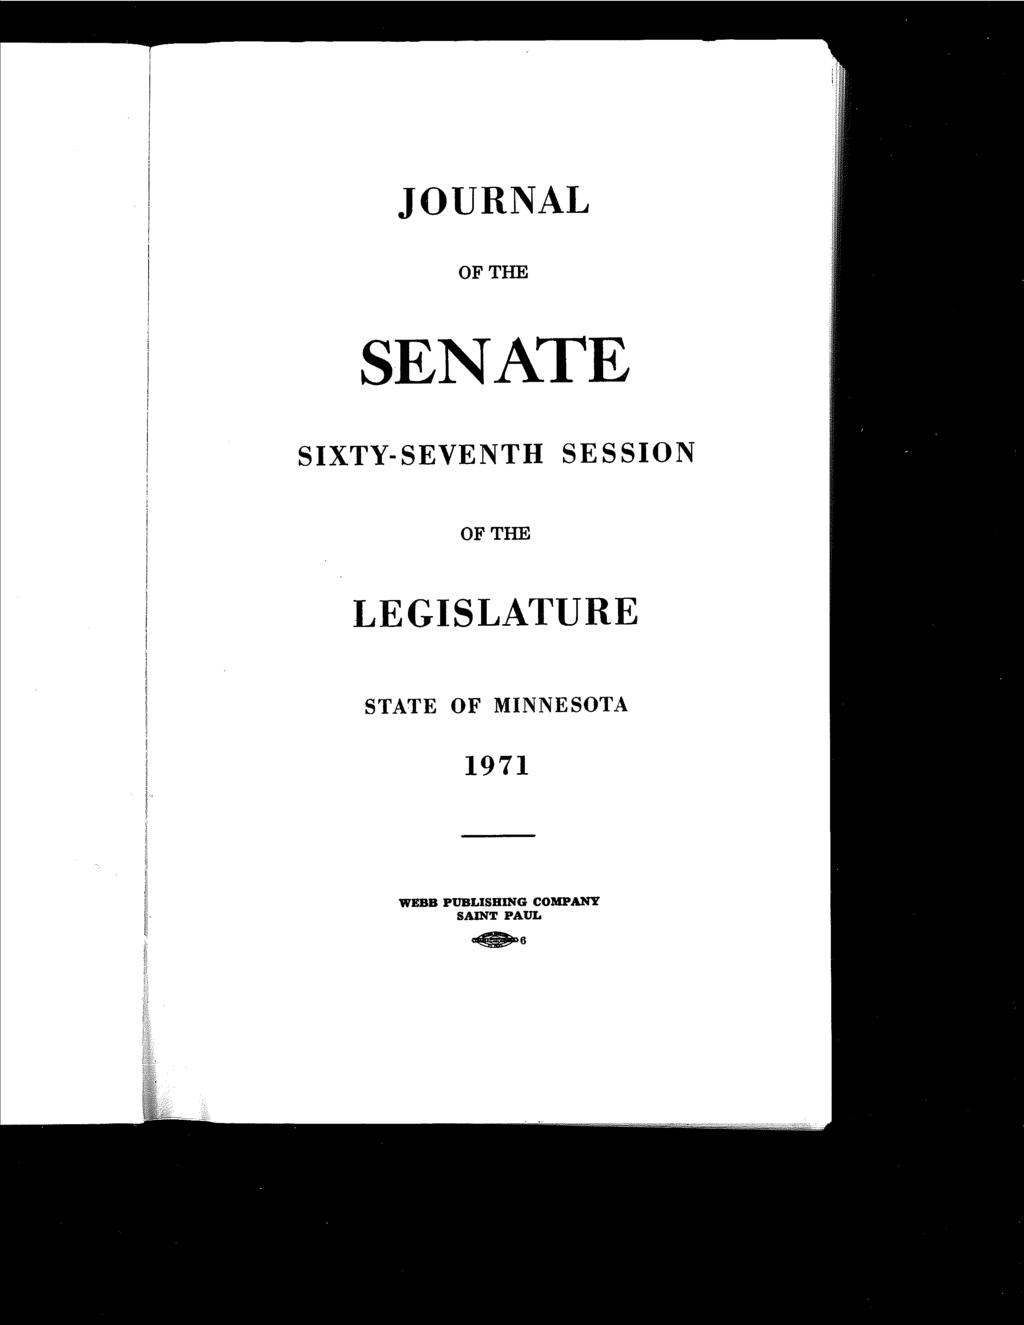 JOURNAL OF THE SENATE SIXTY-SEVENTH SESSION OF THE